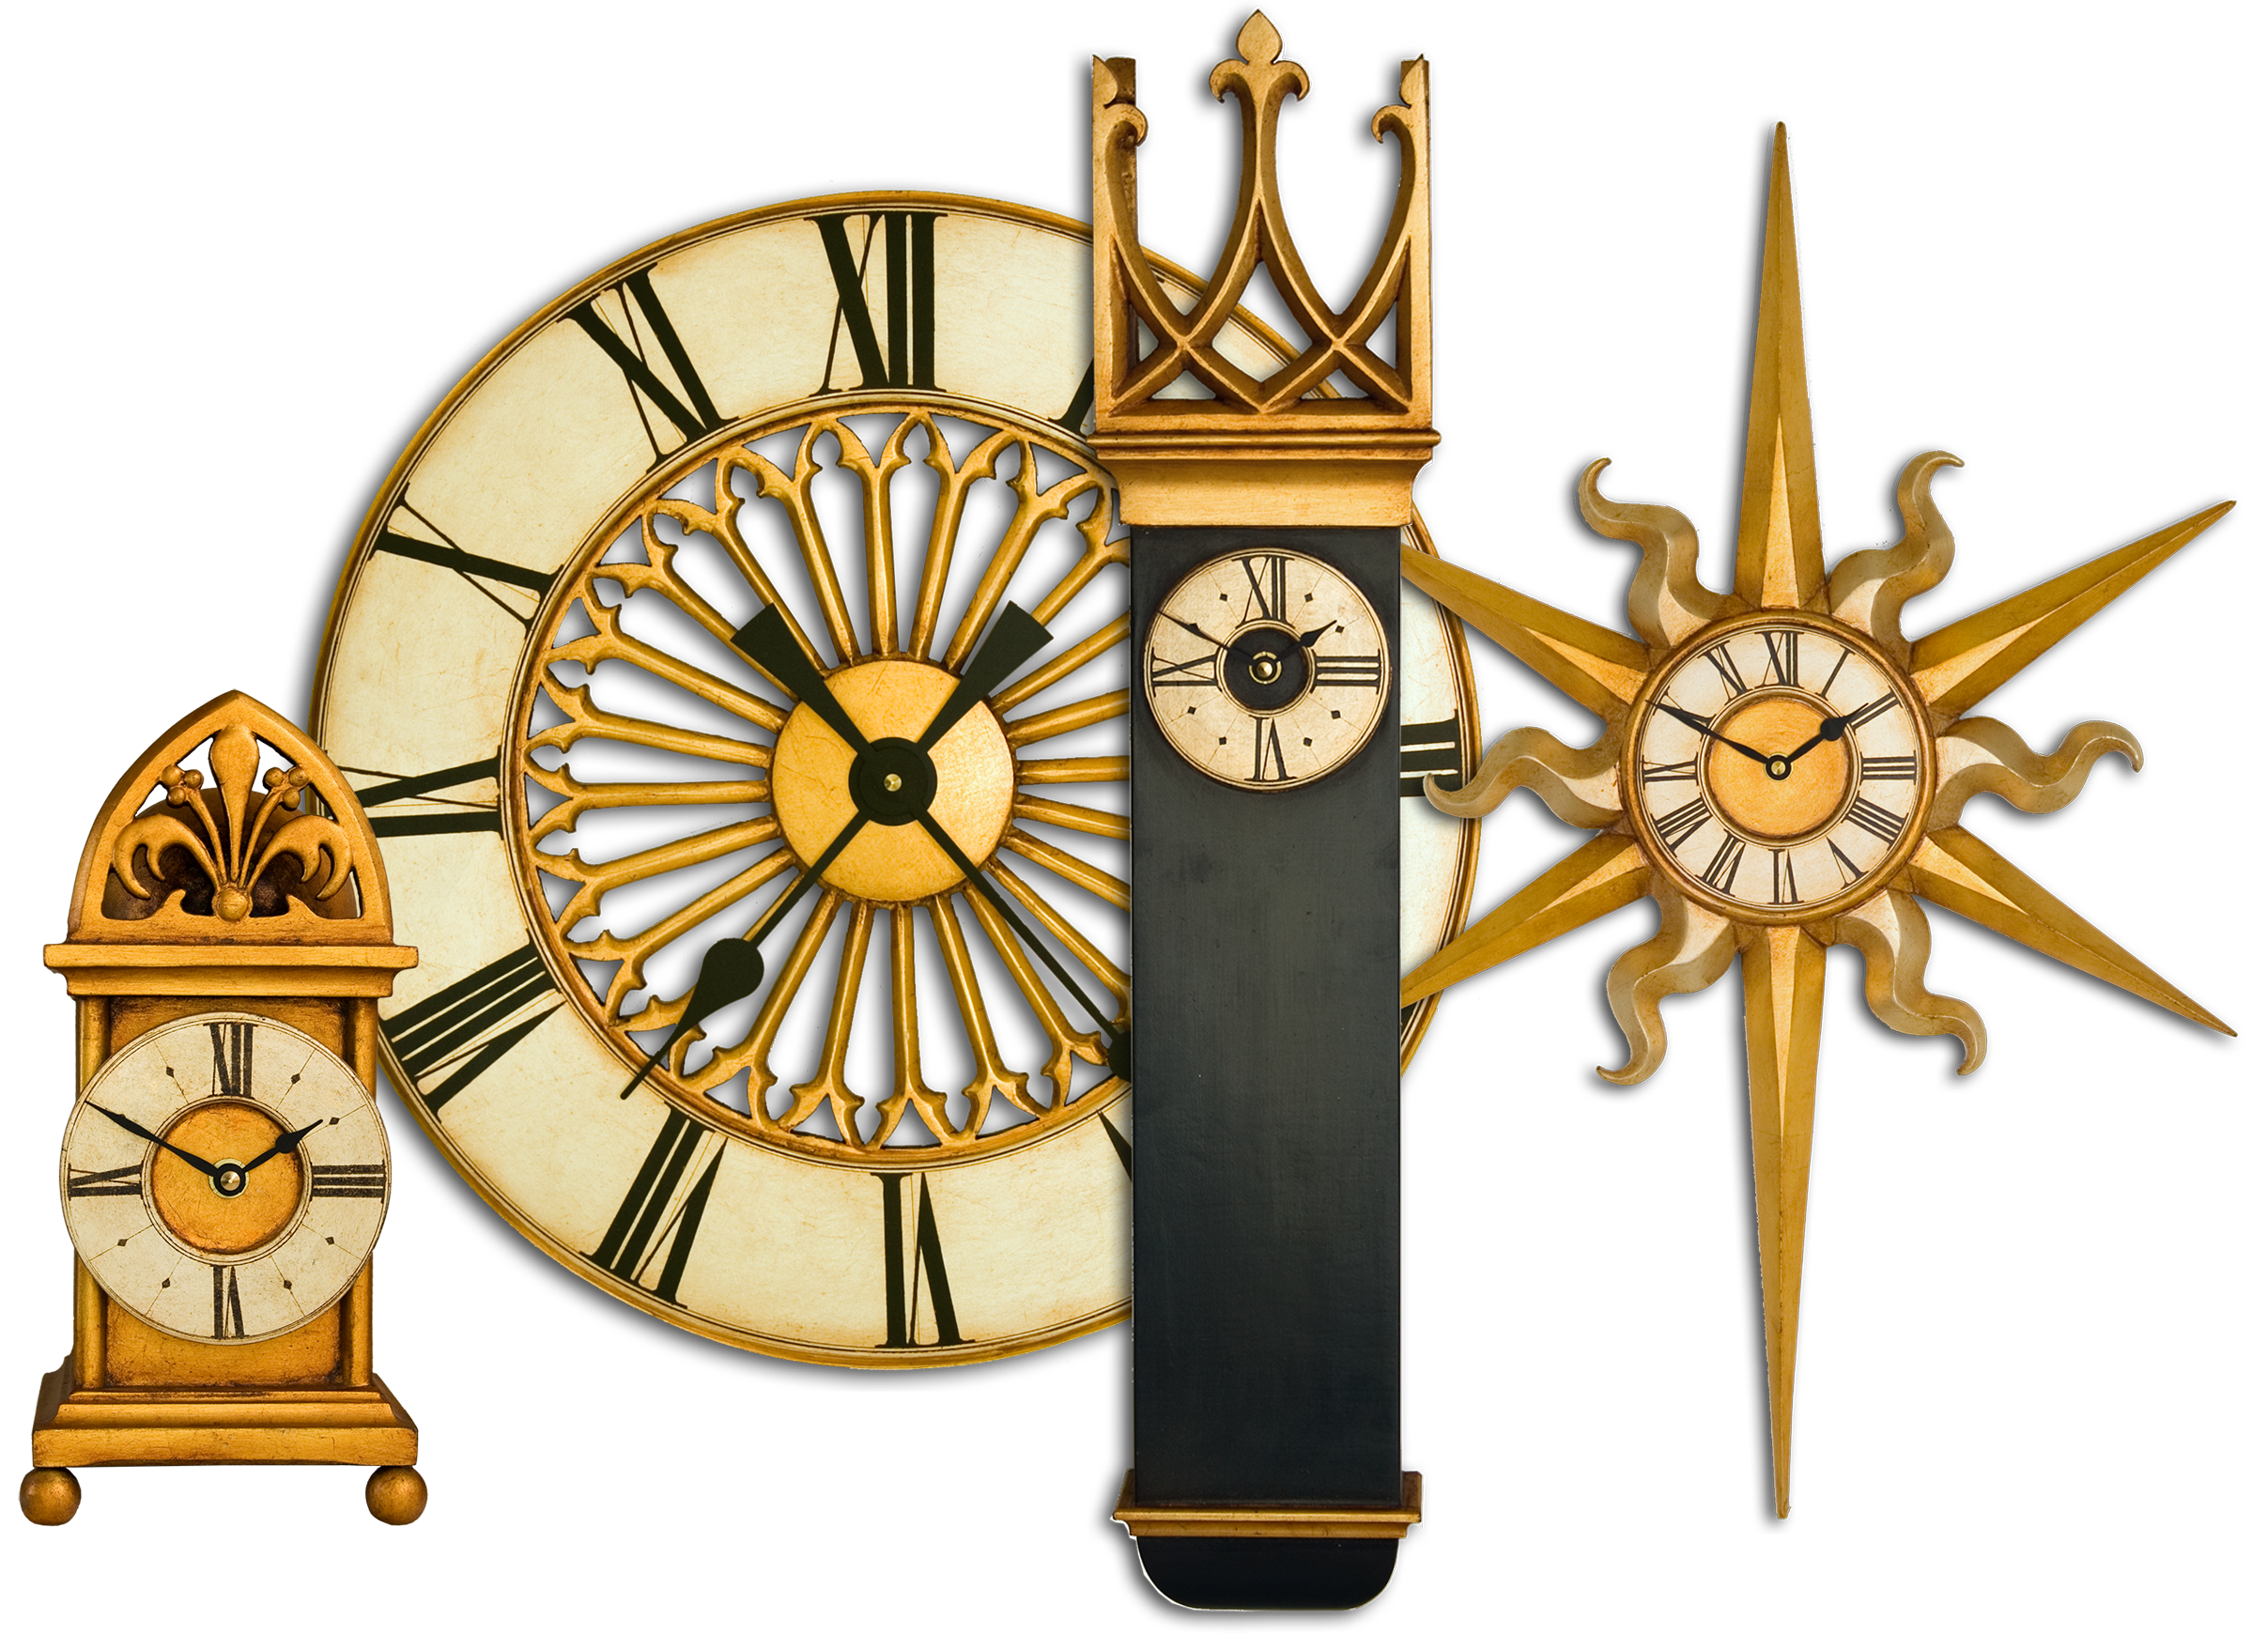 An selection of my stunning clocks from my Gothic Clock Collection